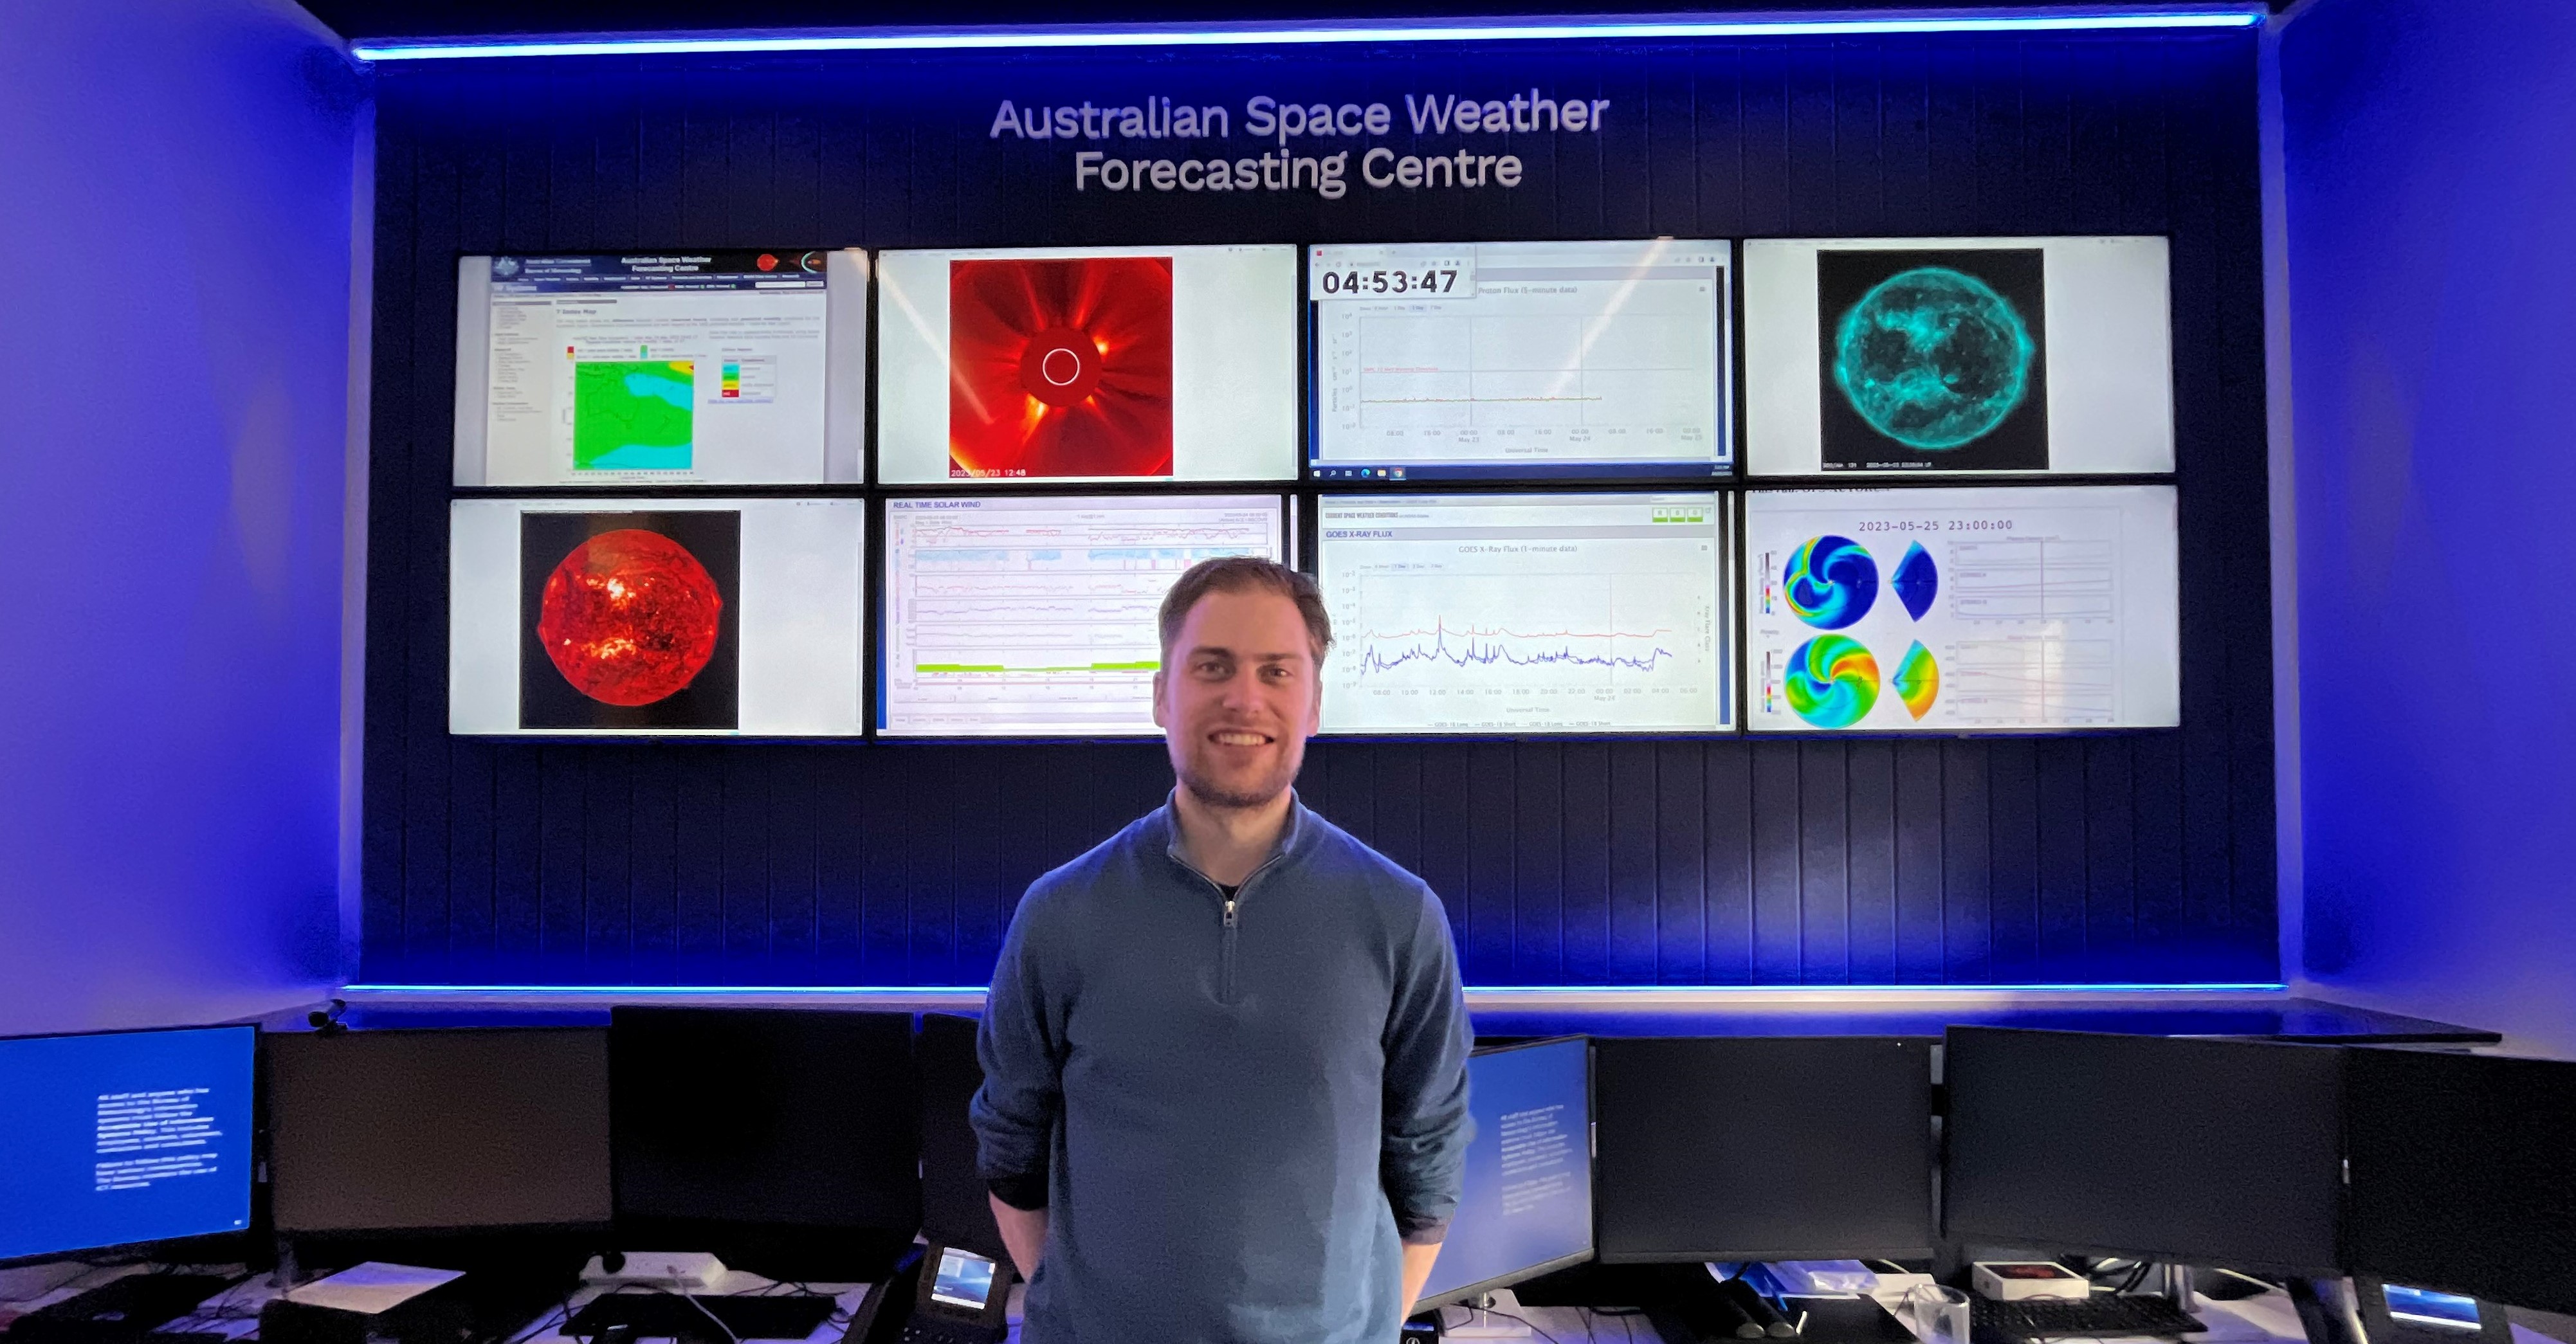 Andrew Jackling at the Australian Space Weather Forecasting centre standing infront of his work station with various monitors showing space weather data